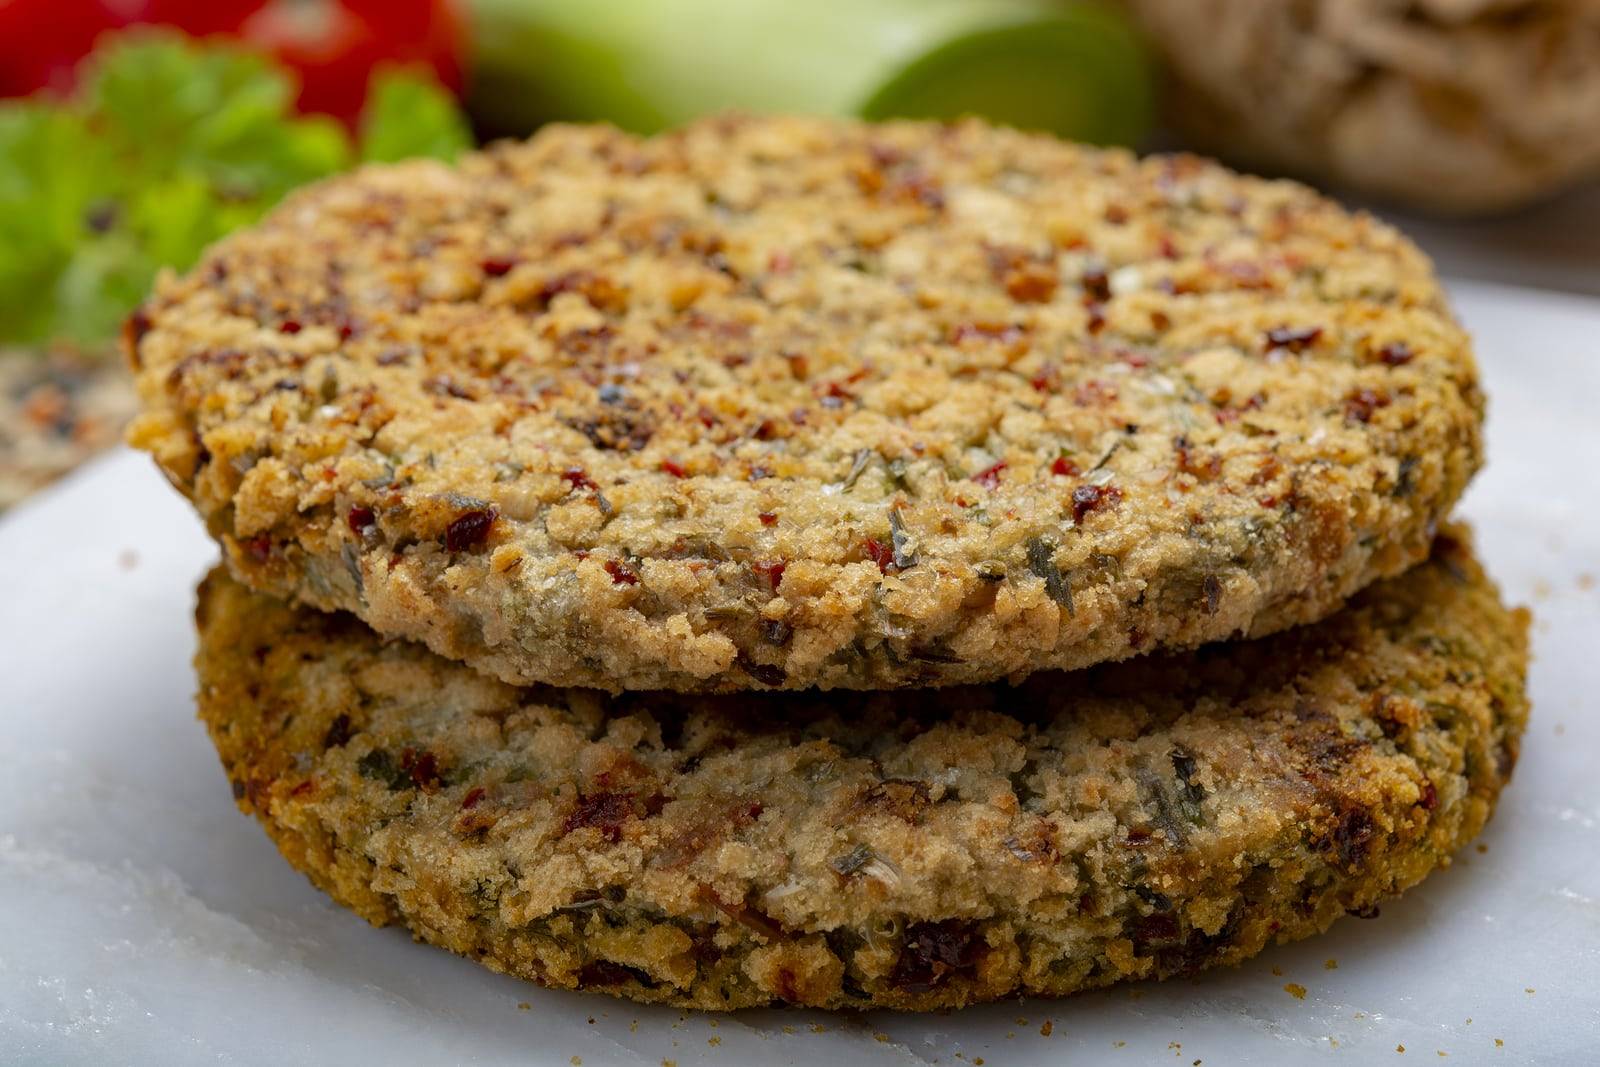 How to Make Your Own Plant-Based Burgers